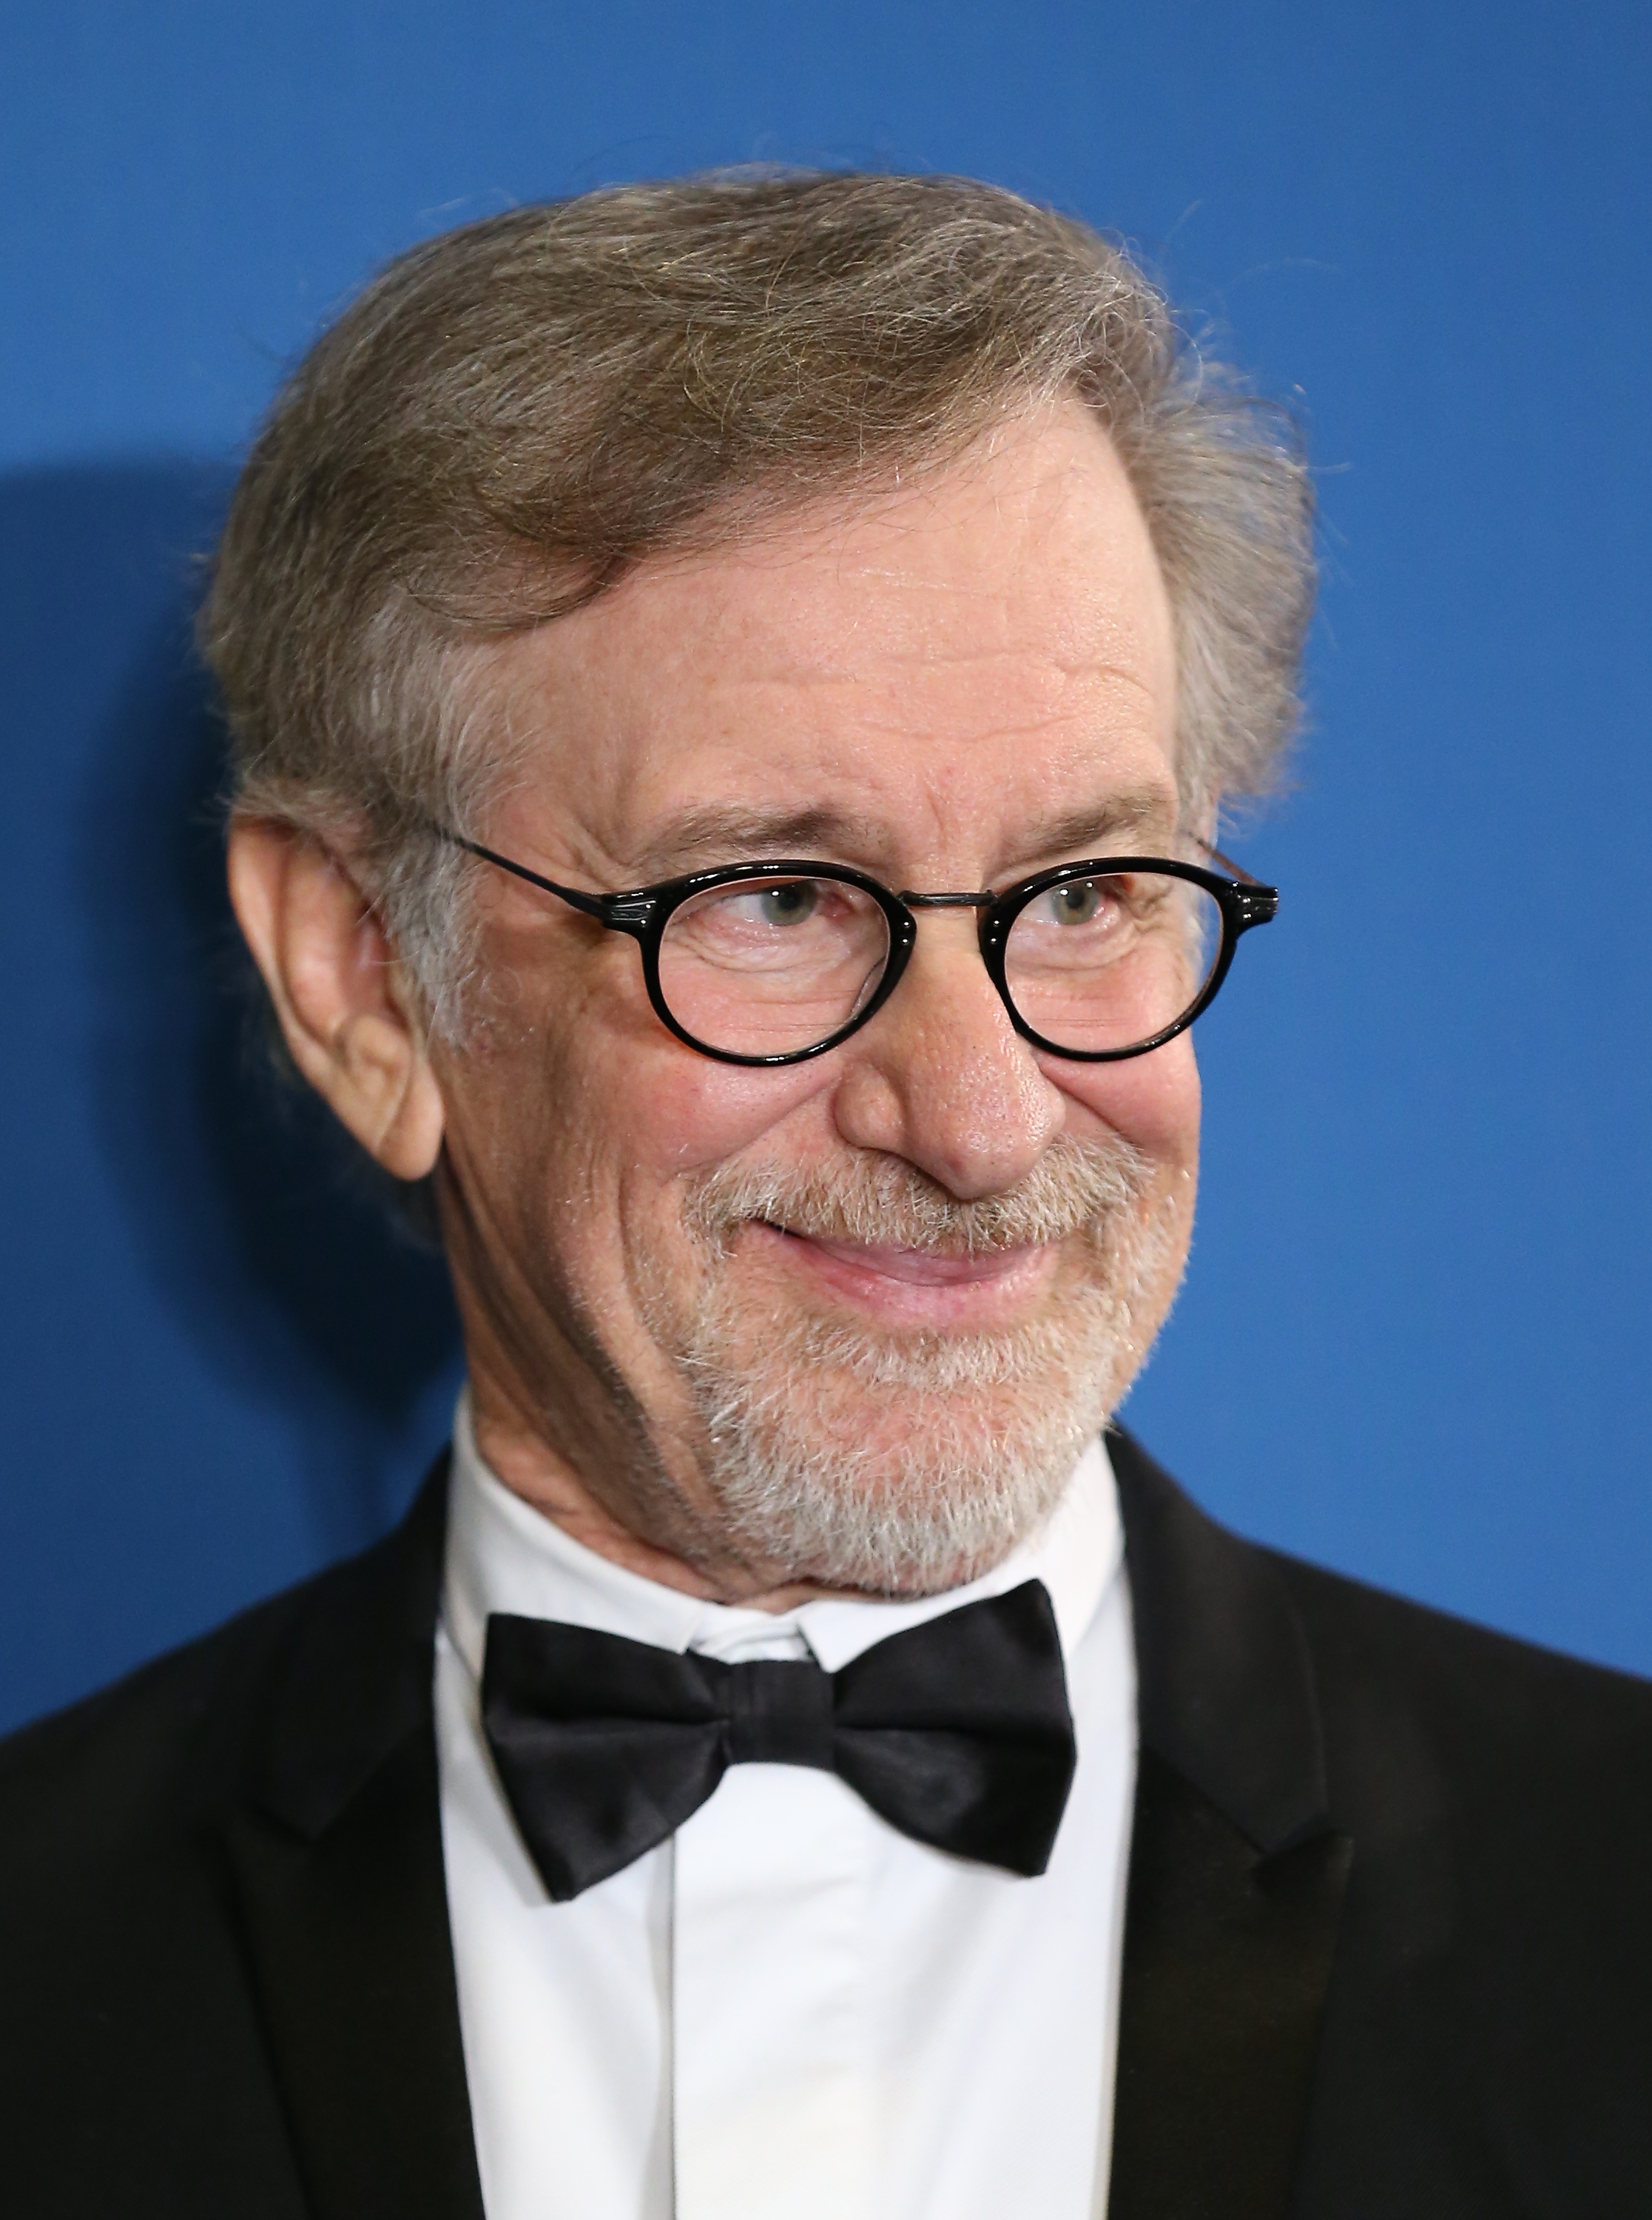 Steven Spielberg at the 67th Annual Directors Guild Of America Awards in Century City, Calif. on Feb. 7, 2015.